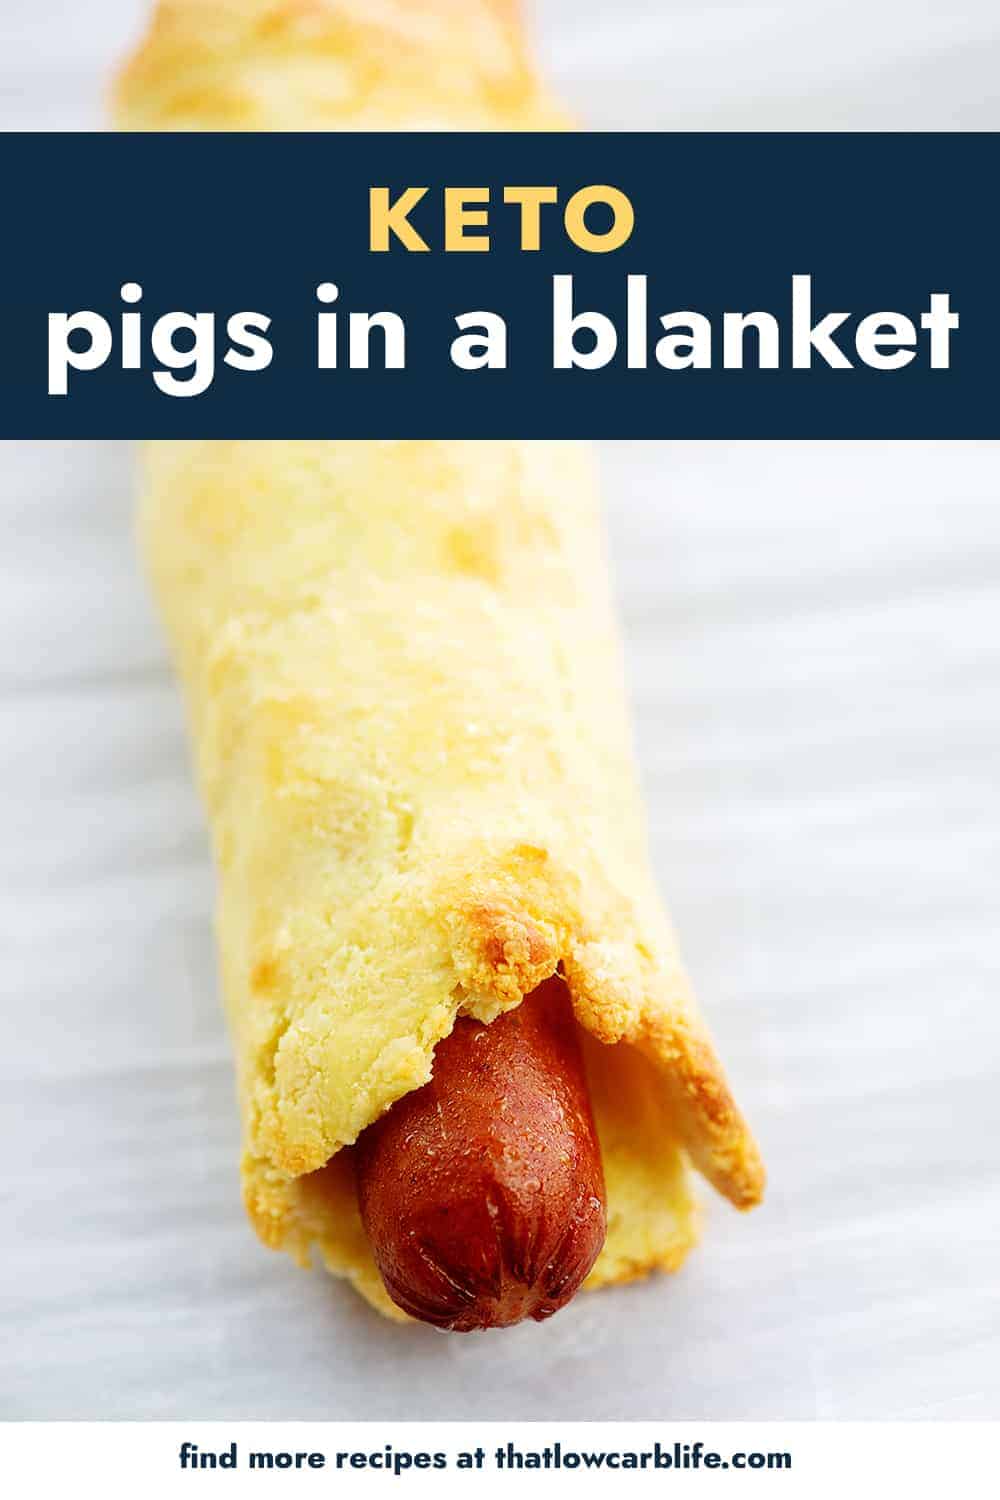 pigs in a blanket with text for Pinterest.